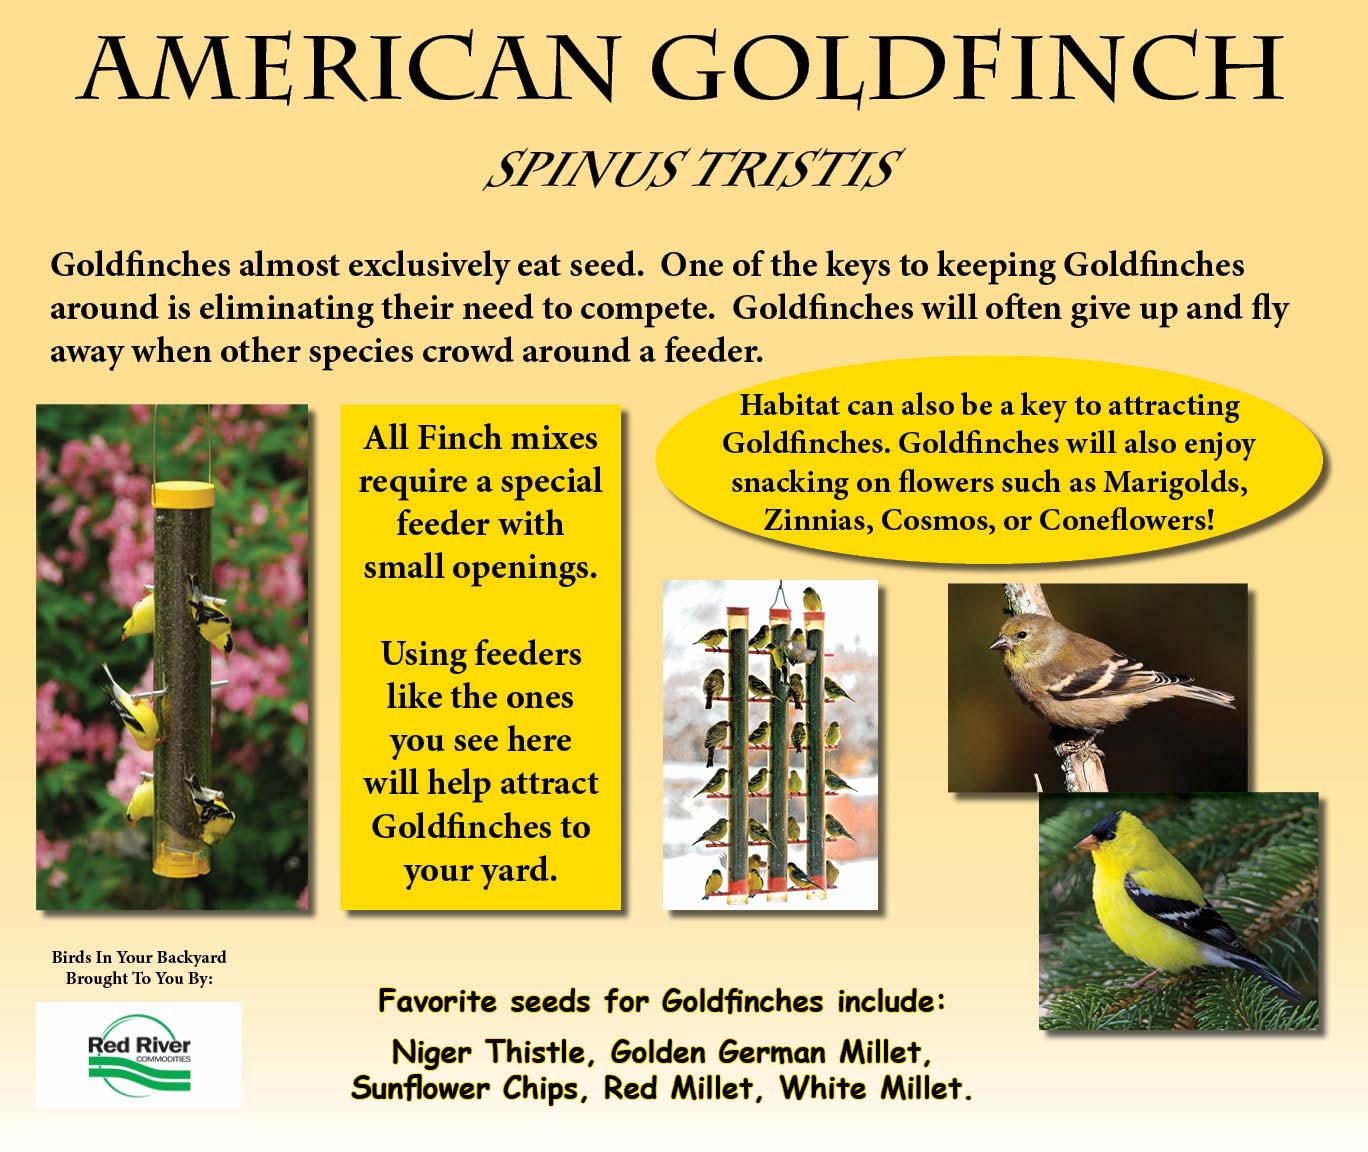 Information about the American Goldfinch